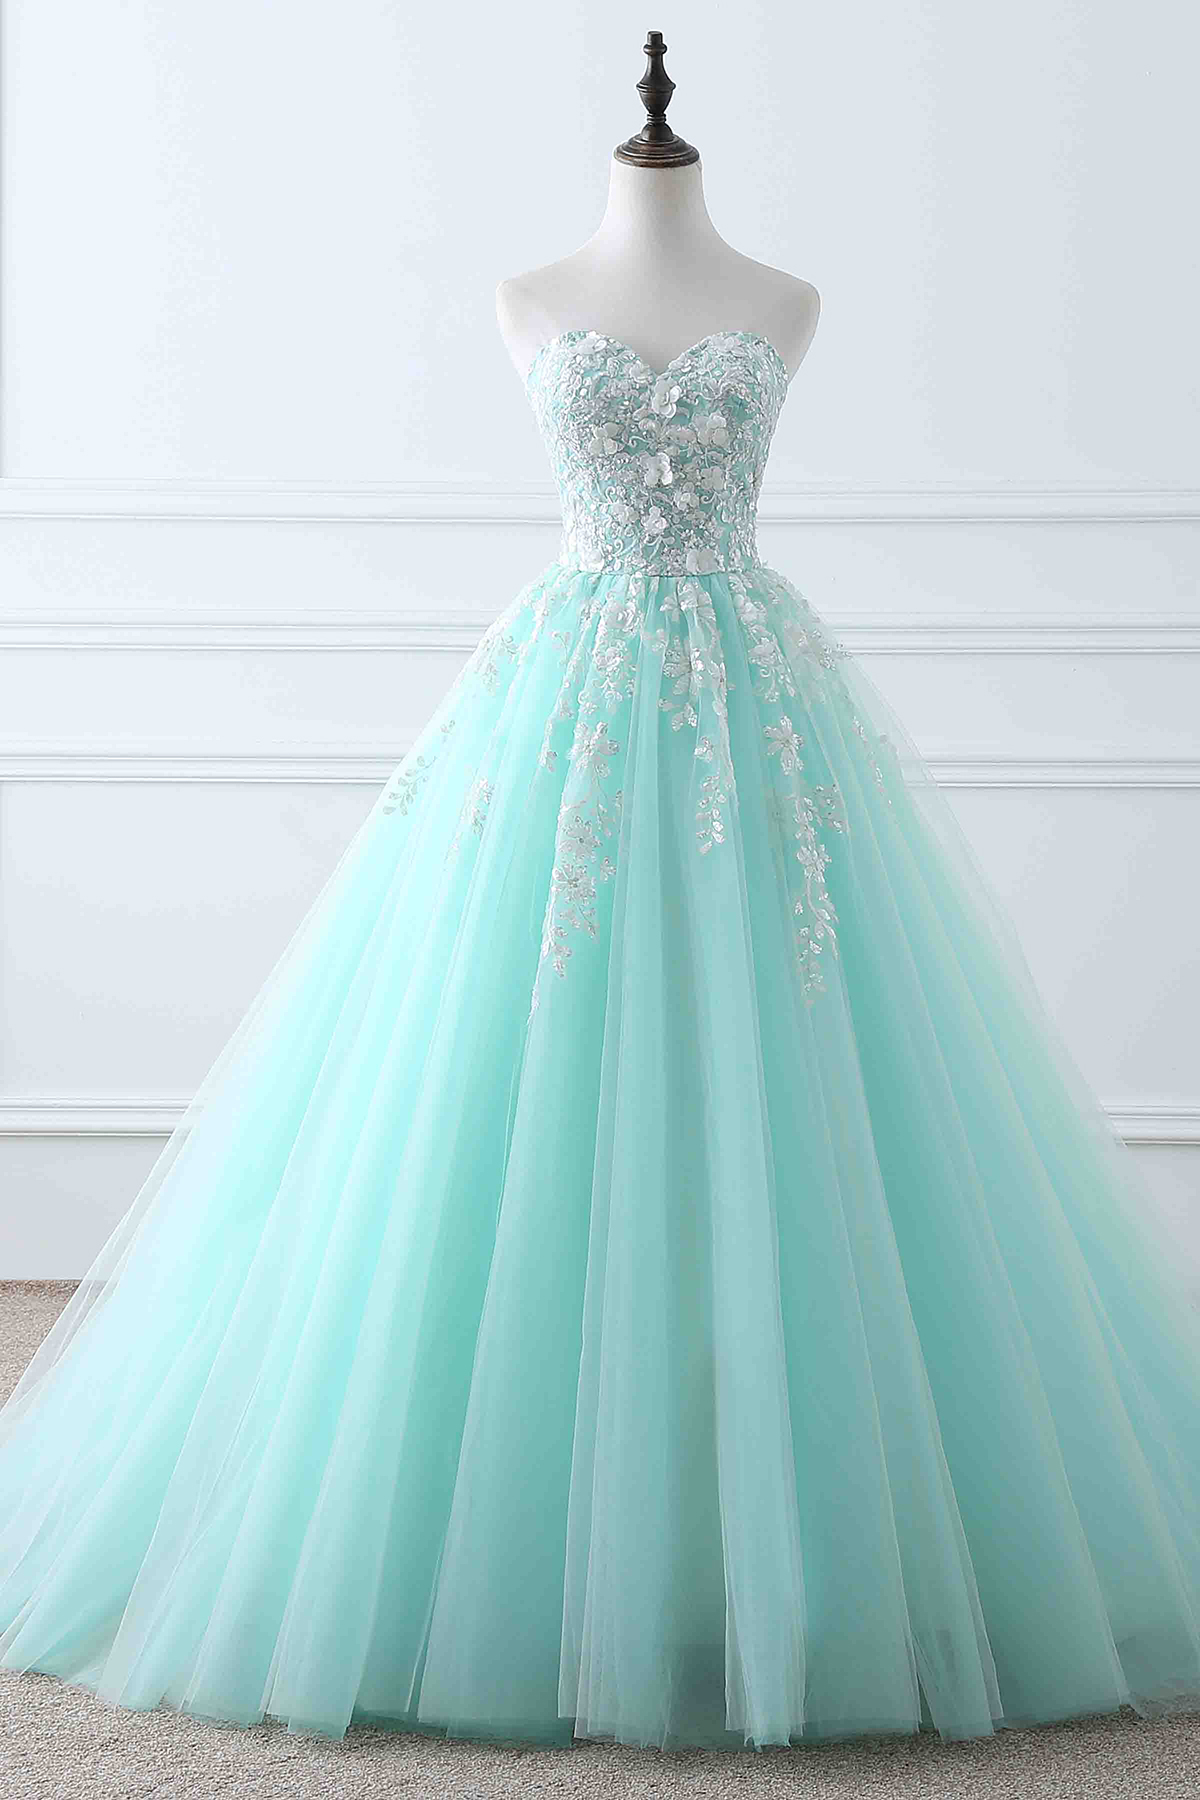 Designer Sweetheart Neck Ice Blue and Off White Prom Ball Gown With 3D Flowers Decorate - Click Image to Close